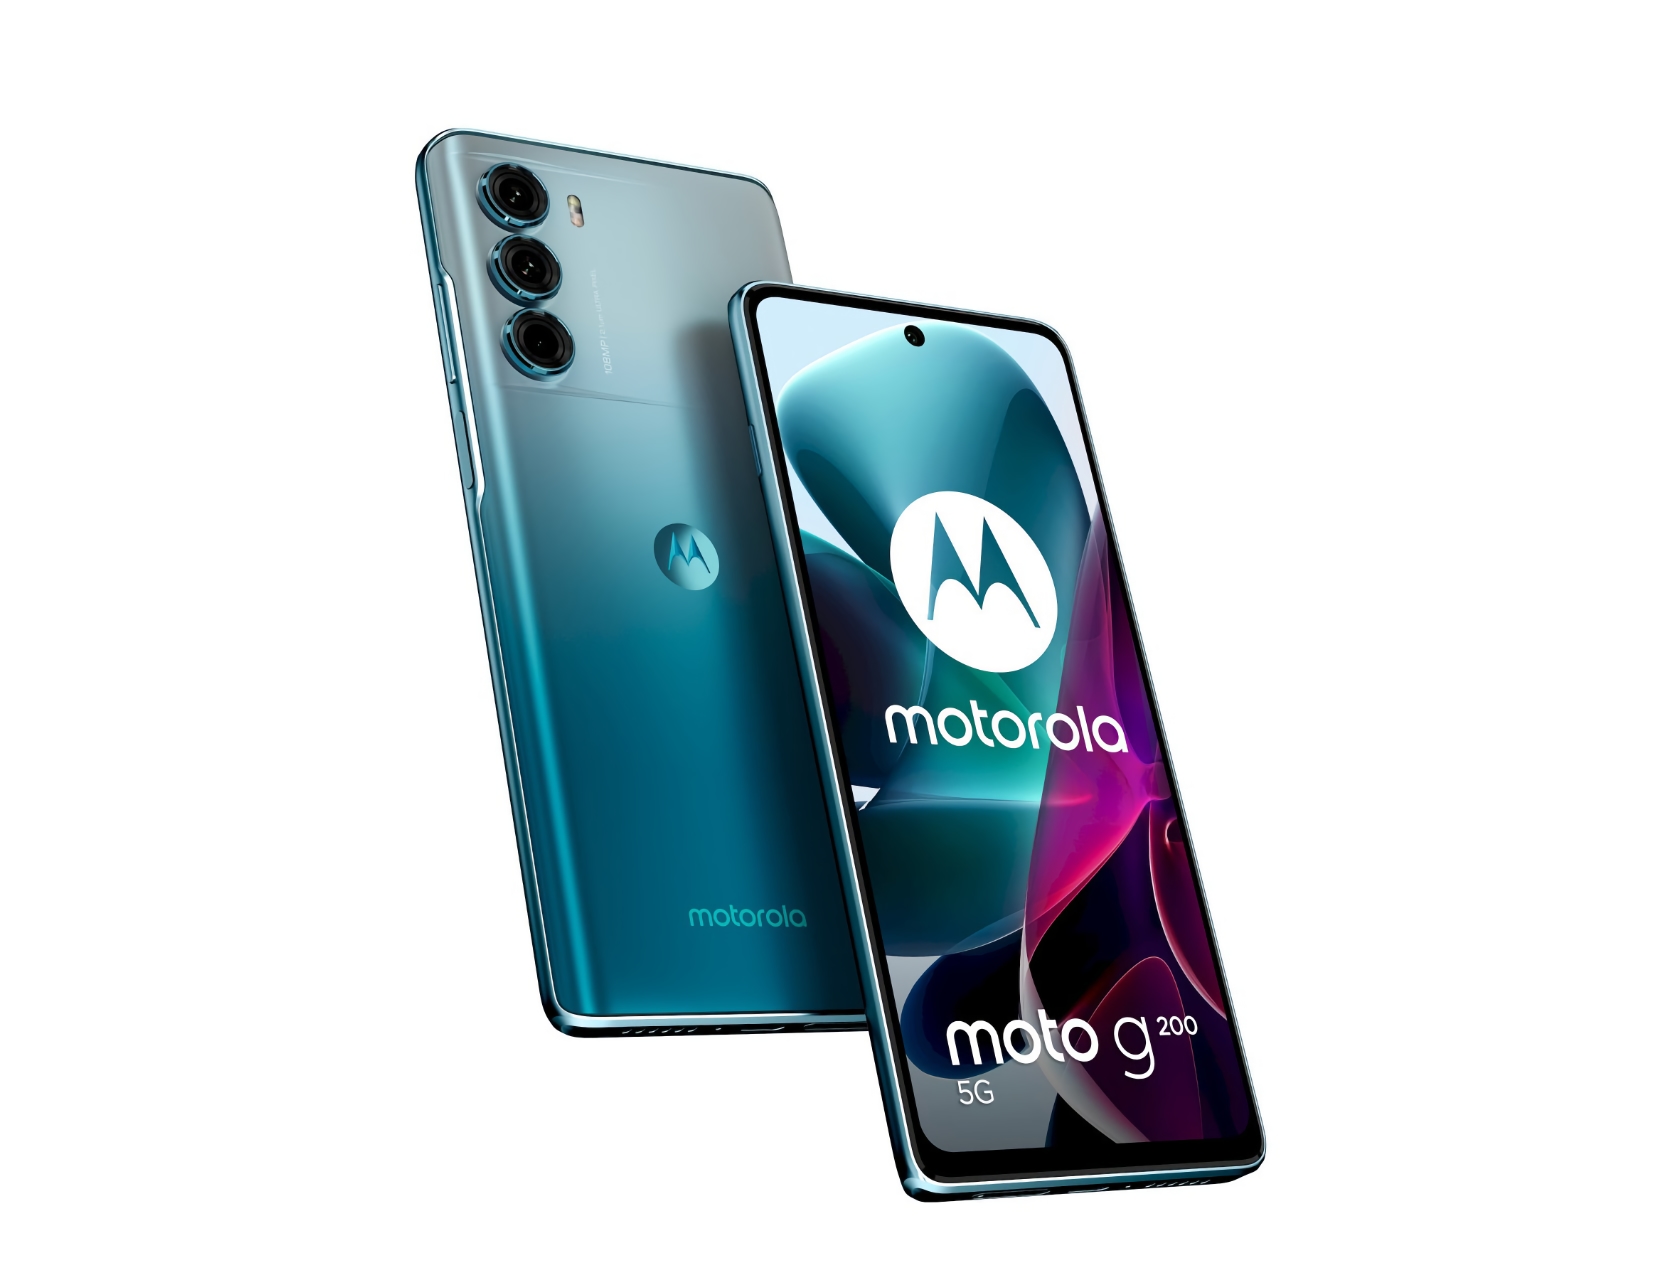 Motorola announces Moto G200: flagship with 6.8-inch 144Hz screen, Snapdragon 888+ chip and 5000mAh battery for 450 euros